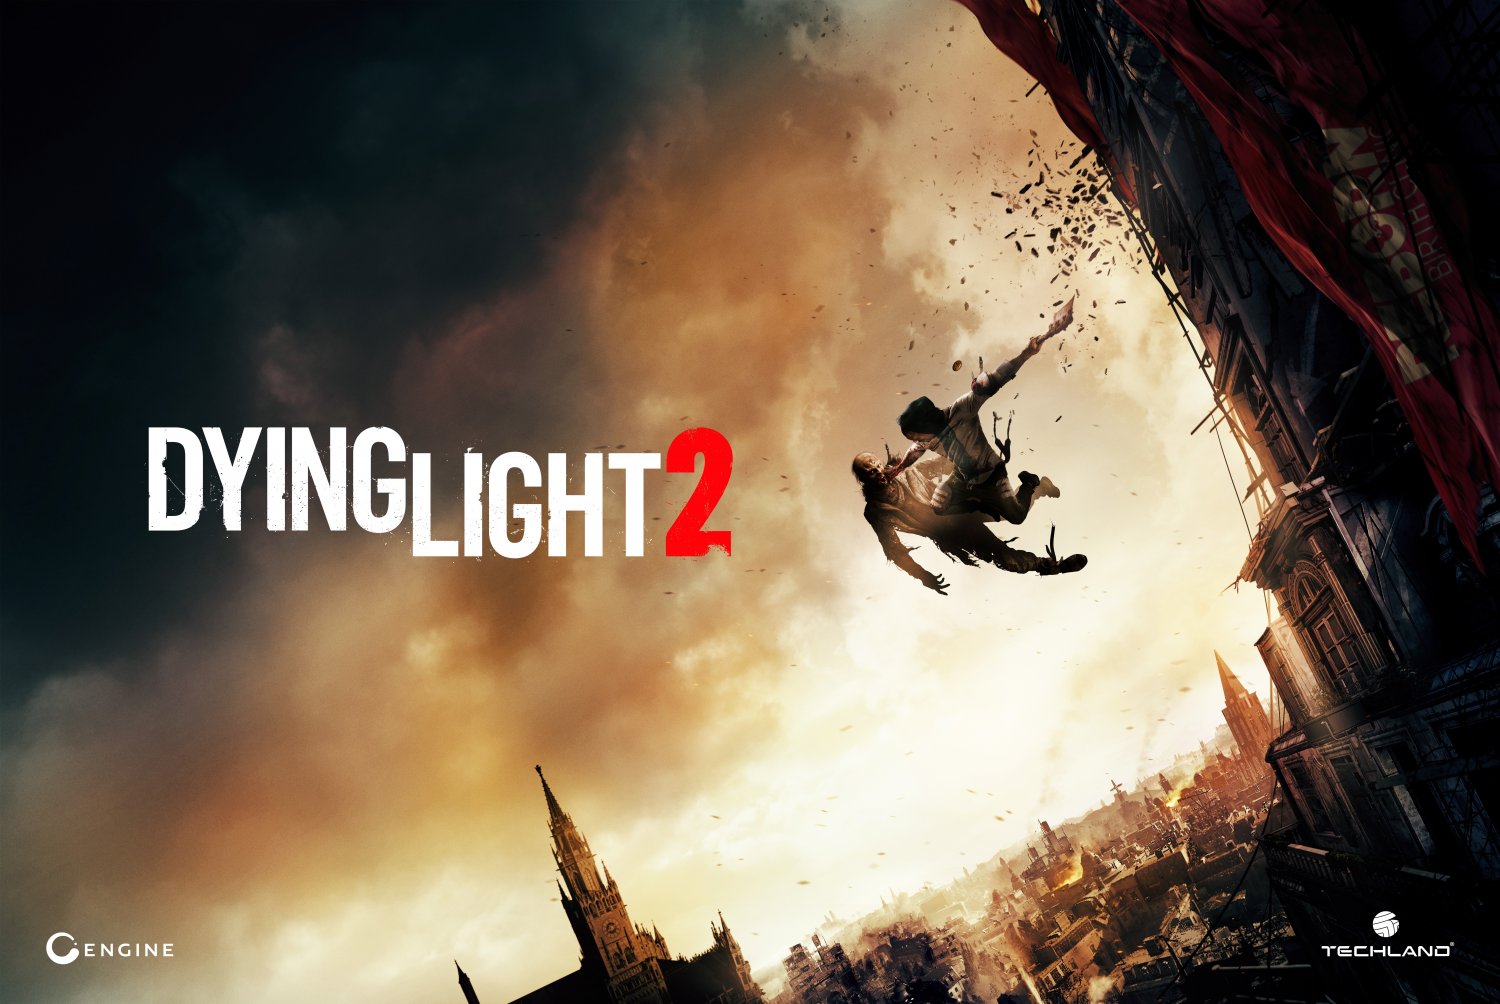 Dying Light 2 Game 13"x19" (32cm/49cm) Polyester Fabric Poster